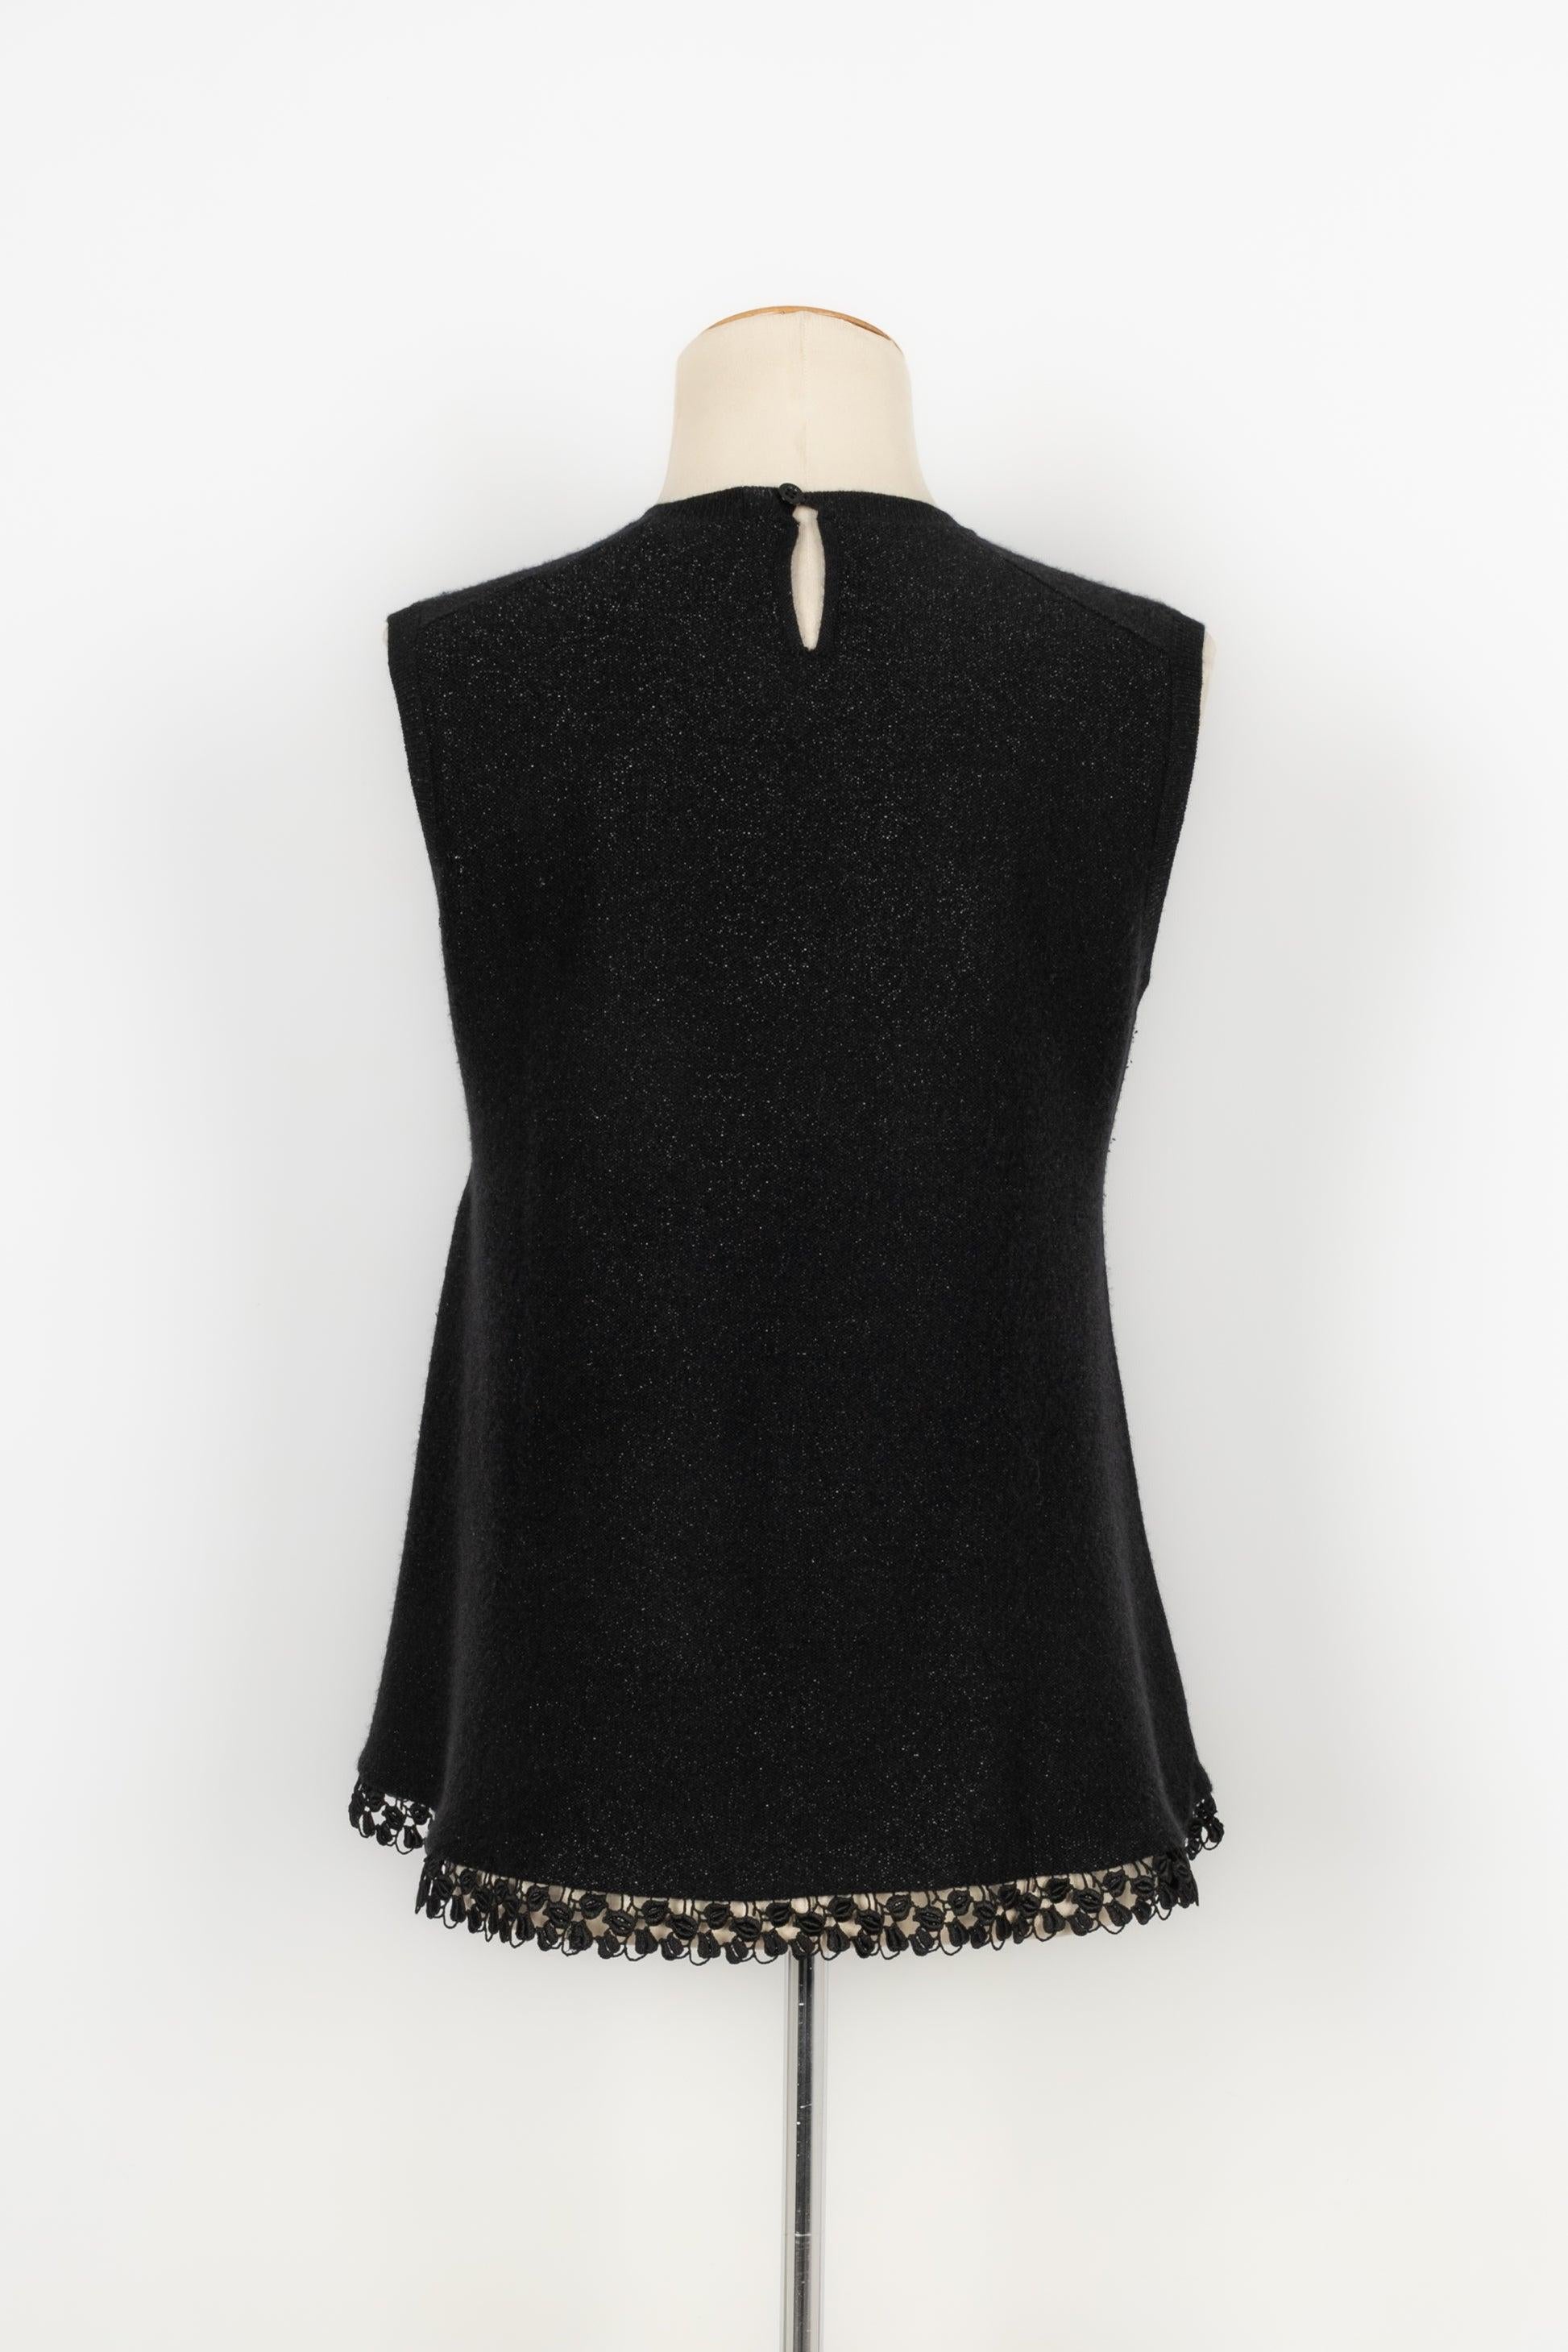 Dior Black Silk and Cashmere Sequinned Top, 2003 In Excellent Condition For Sale In SAINT-OUEN-SUR-SEINE, FR